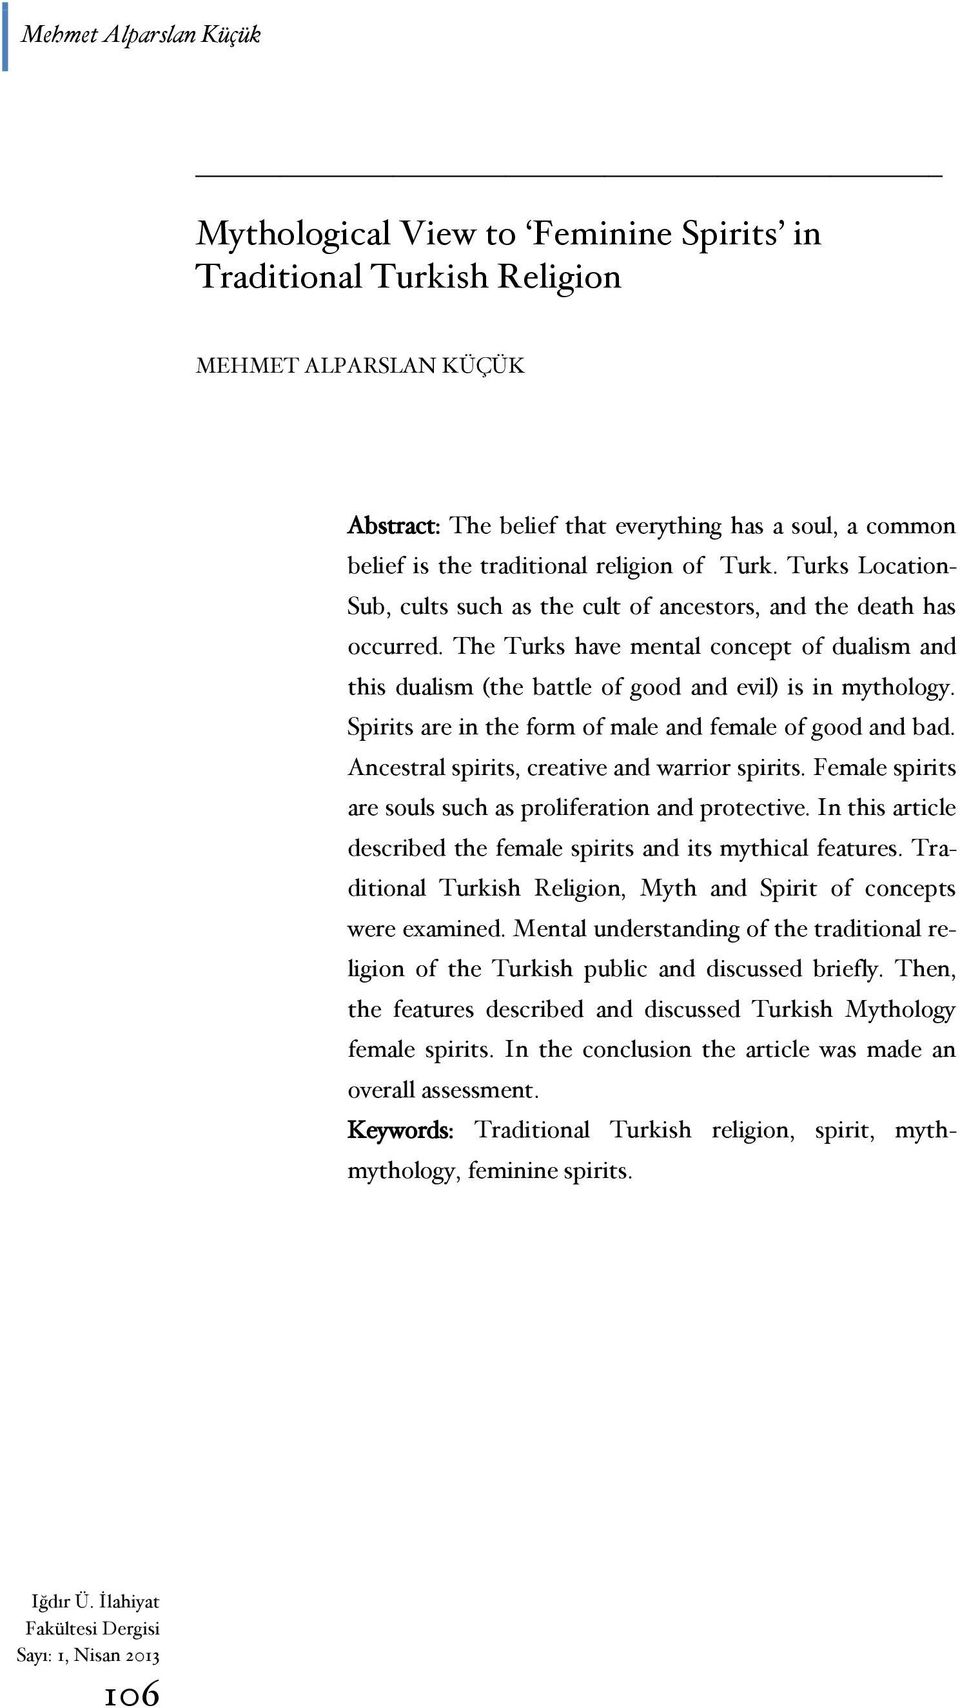 The Turks have mental concept of dualism and this dualism (the battle of good and evil) is in mythology. Spirits are in the form of male and female of good and bad.